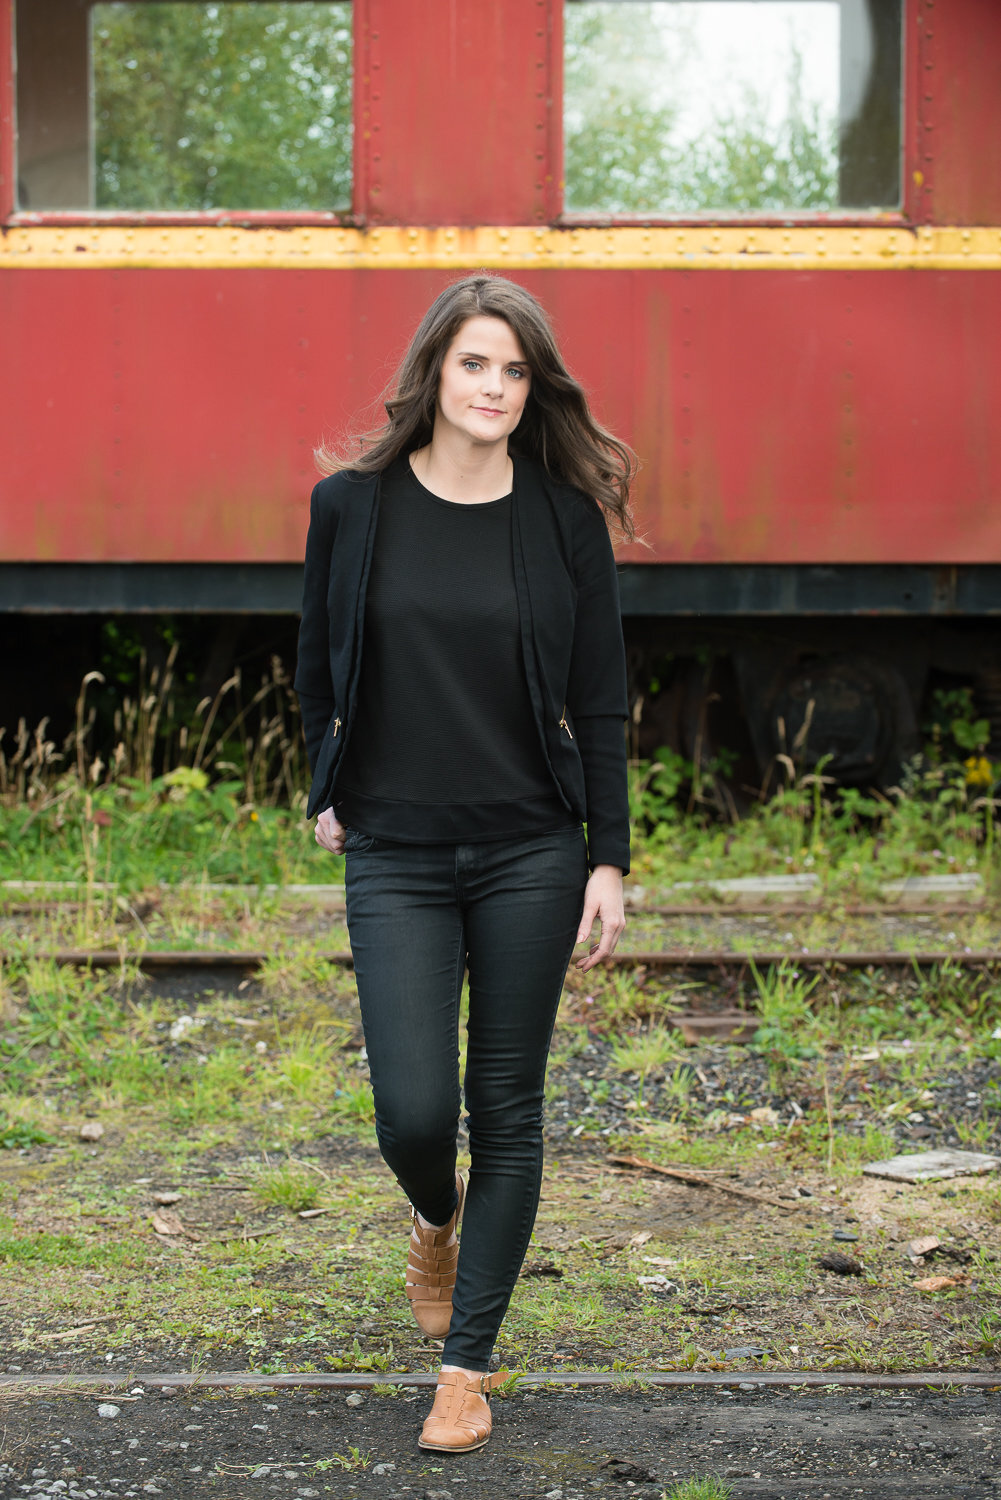 actress with long, brunette hair, in a black jeans and top, walking across train track